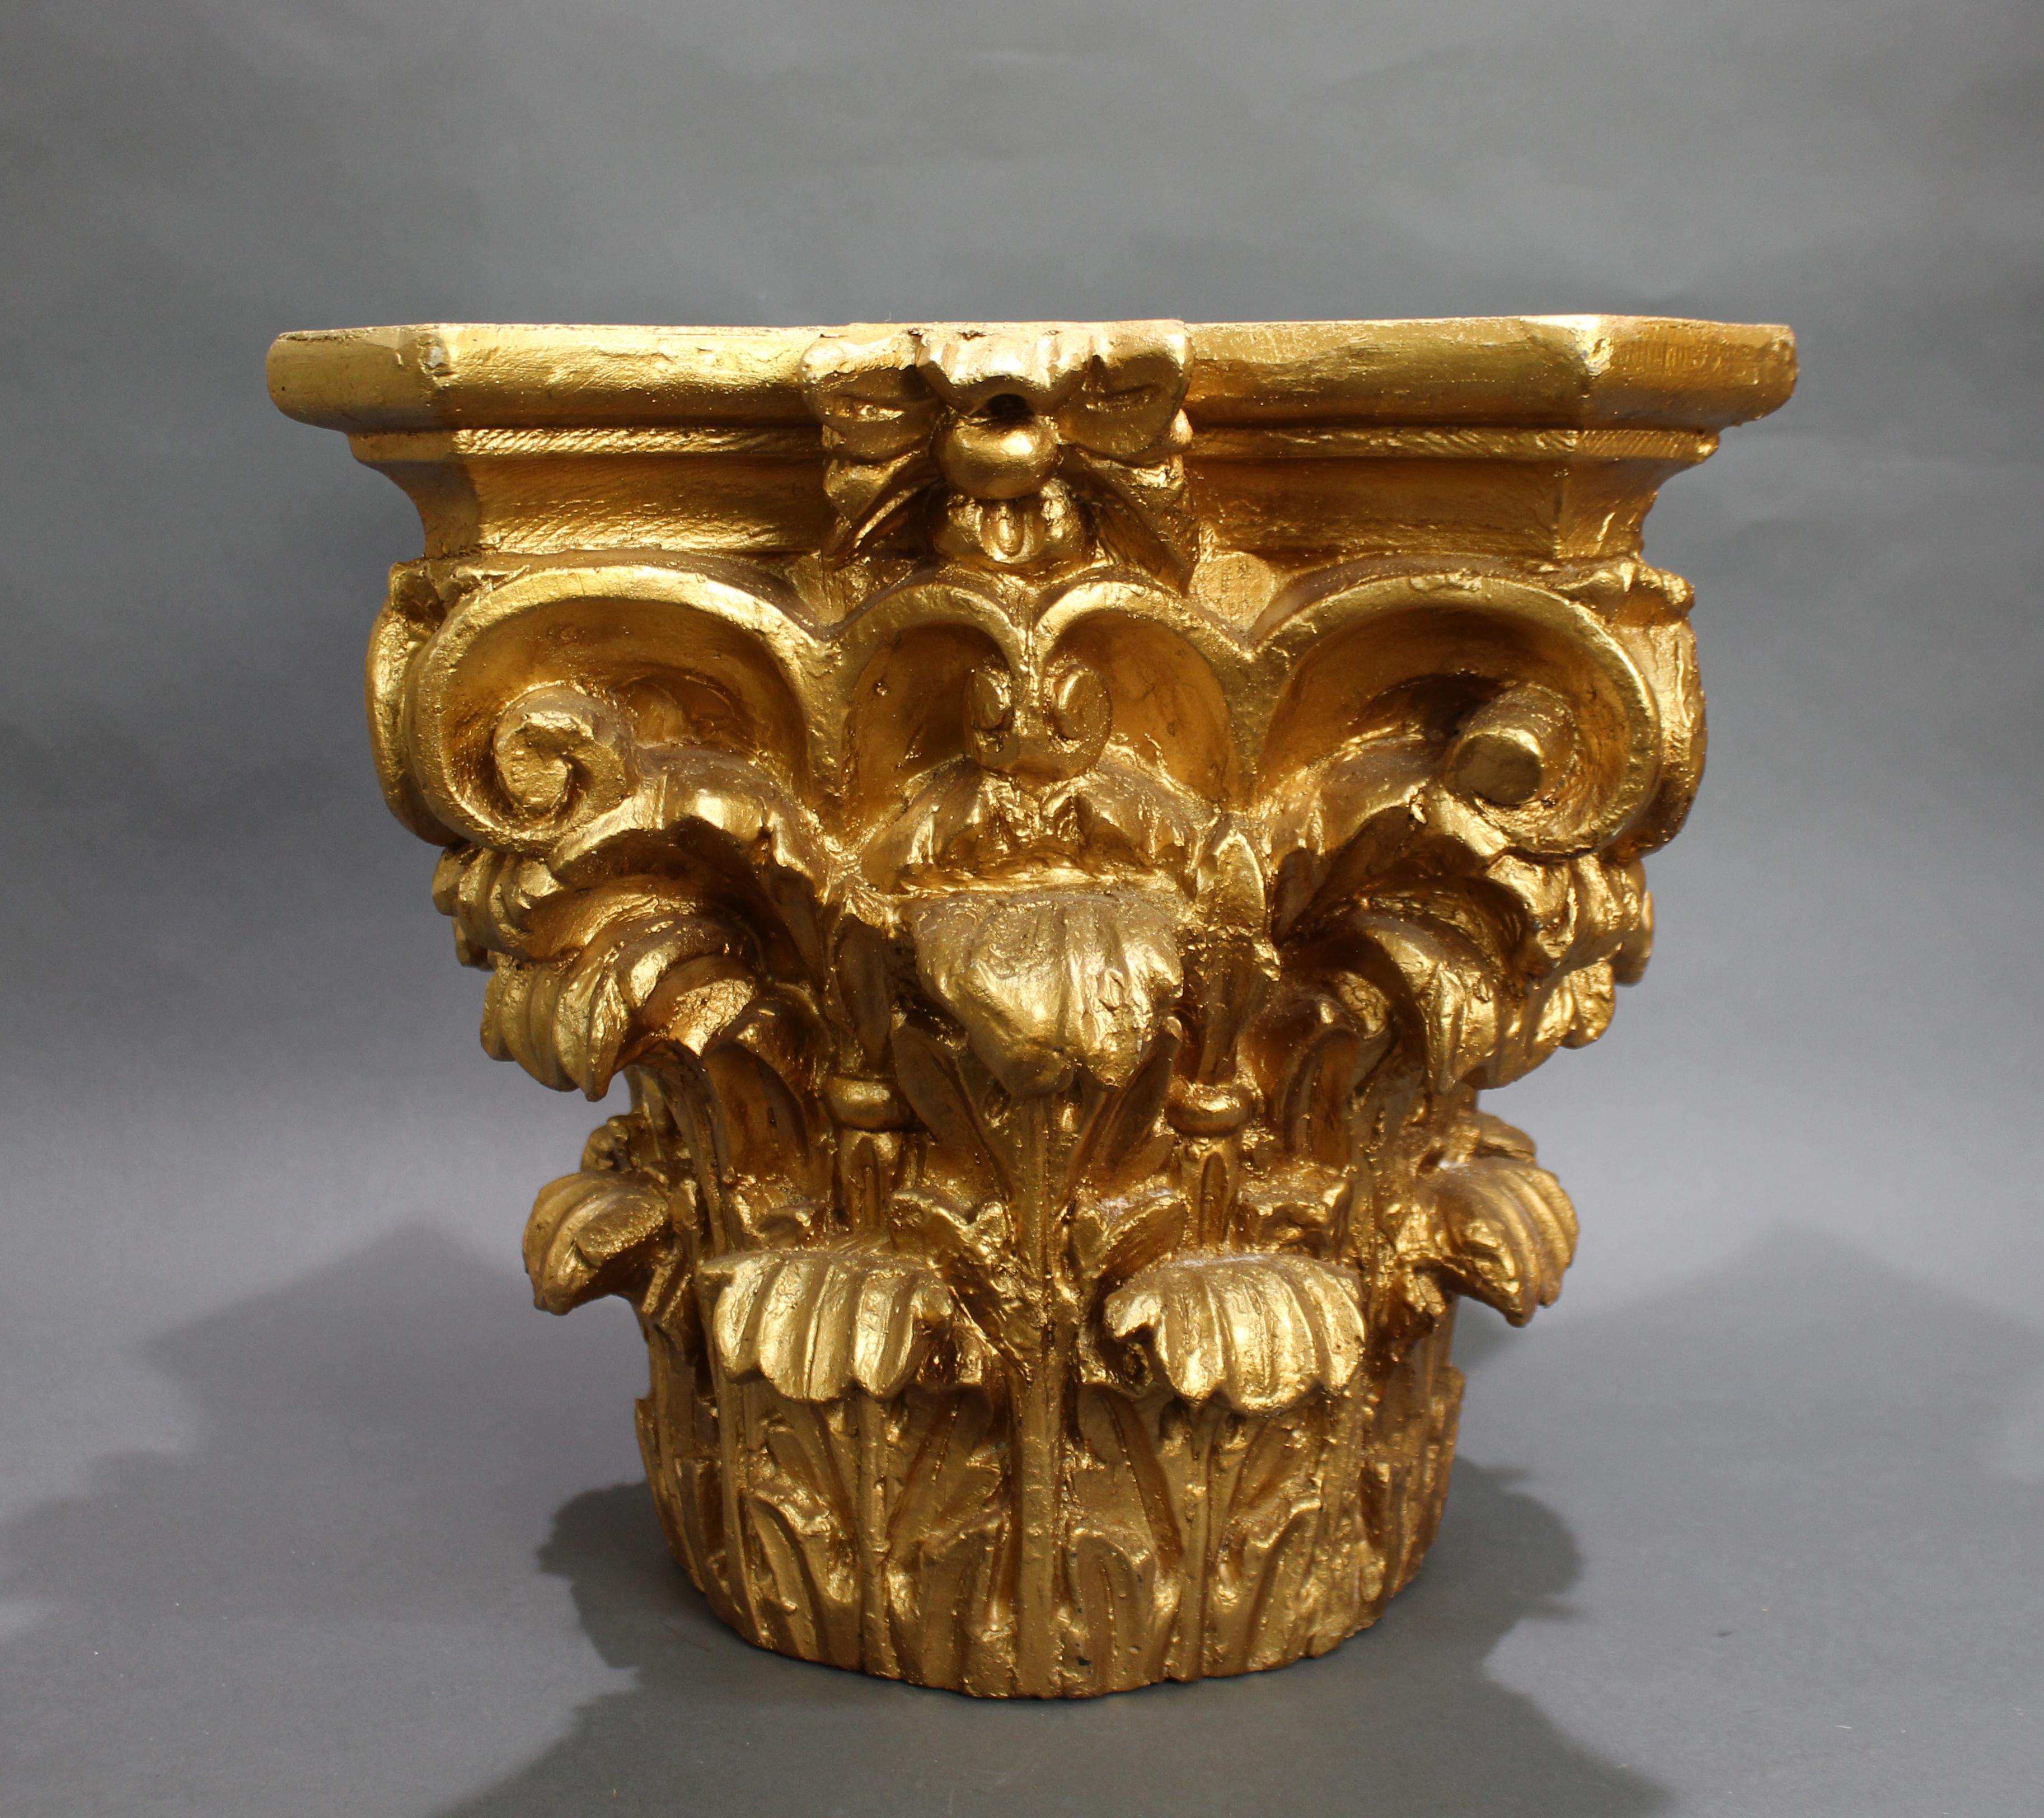 Gilt Corinthian Capital pedestal base


Measures: Top 34 x 34 cm 13 1/4 x 13 1/4 in

Height 32 cm 12 1/4 in
 
Corinthian capital form pedestal/stand

Late twentieth century

Composite plaster with Royal gold finish

Good condition in